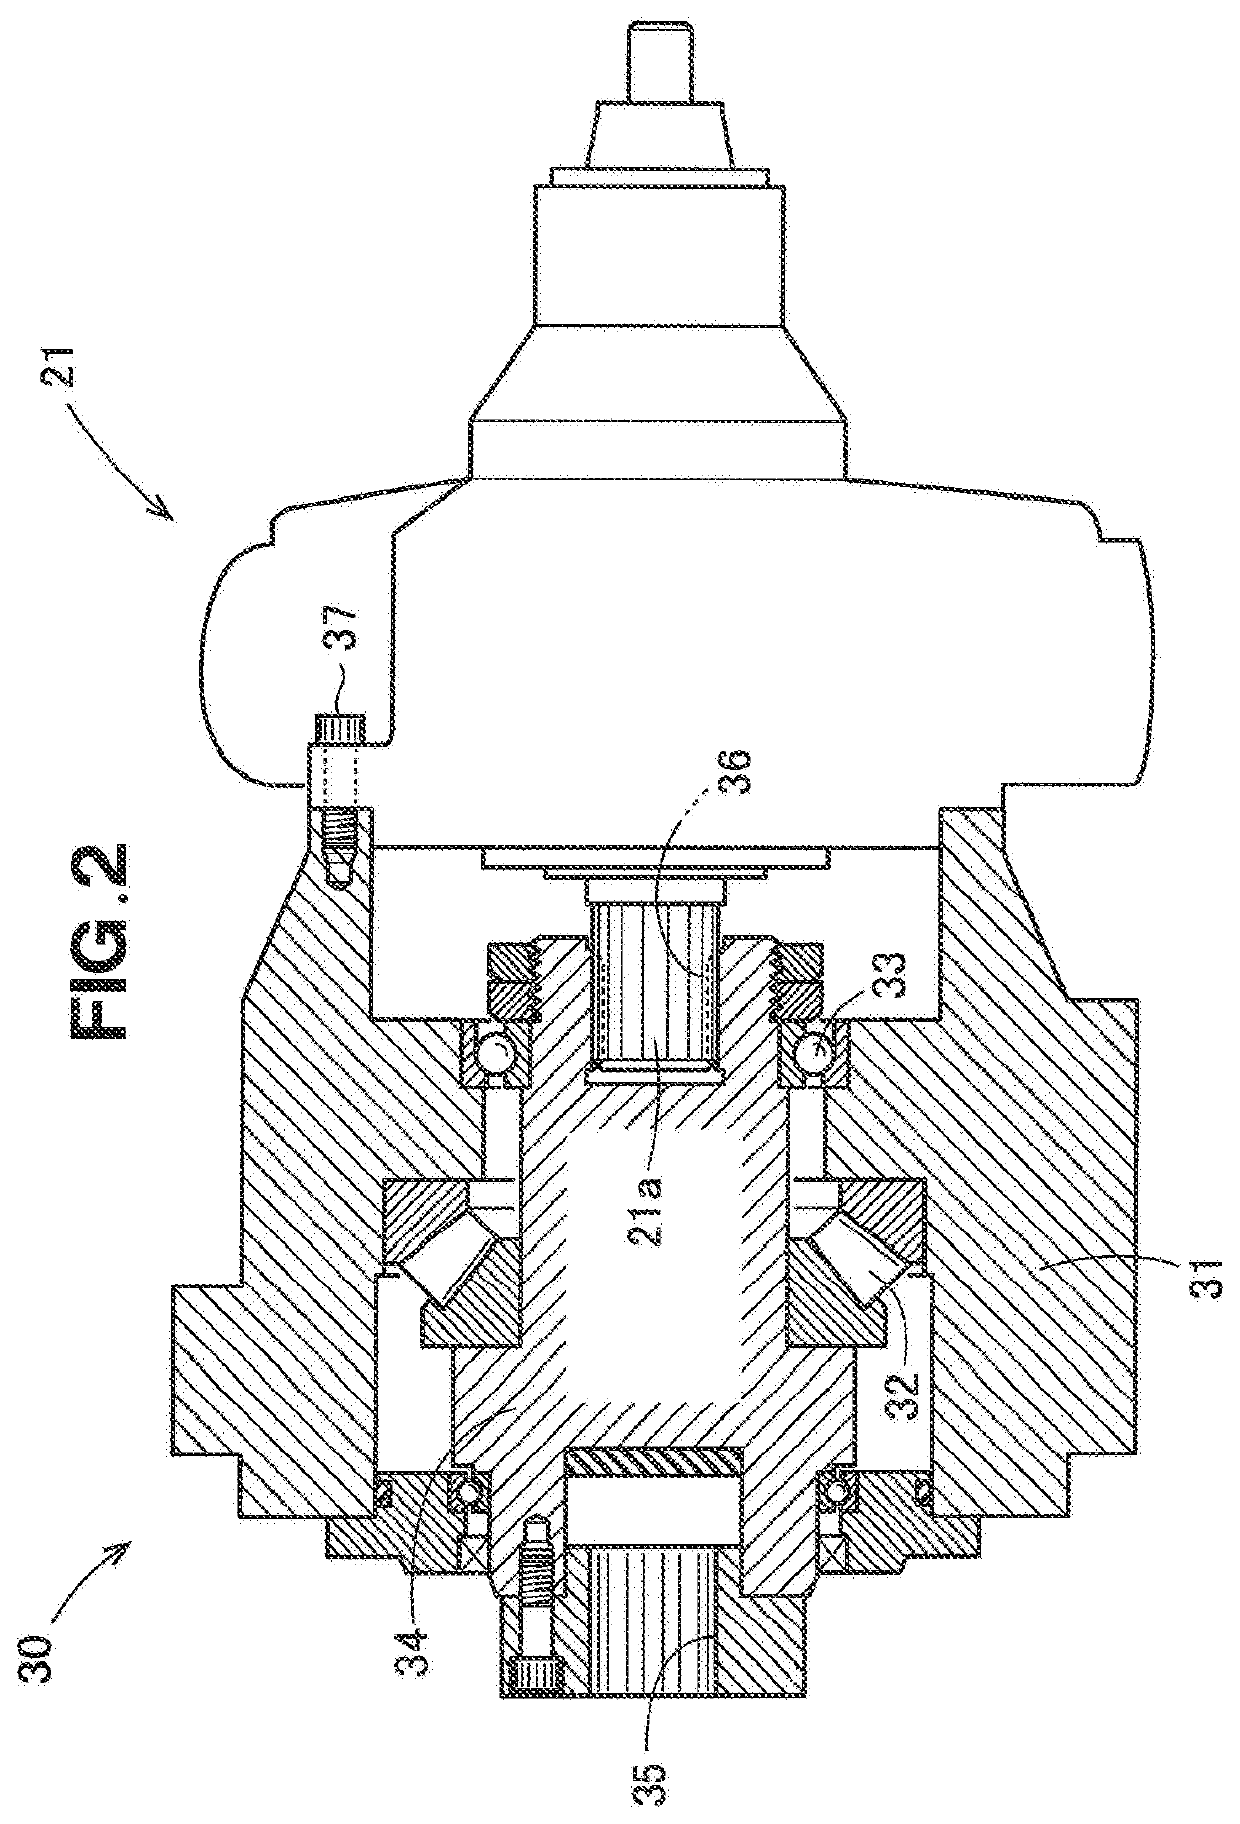 Injection molding apparatus